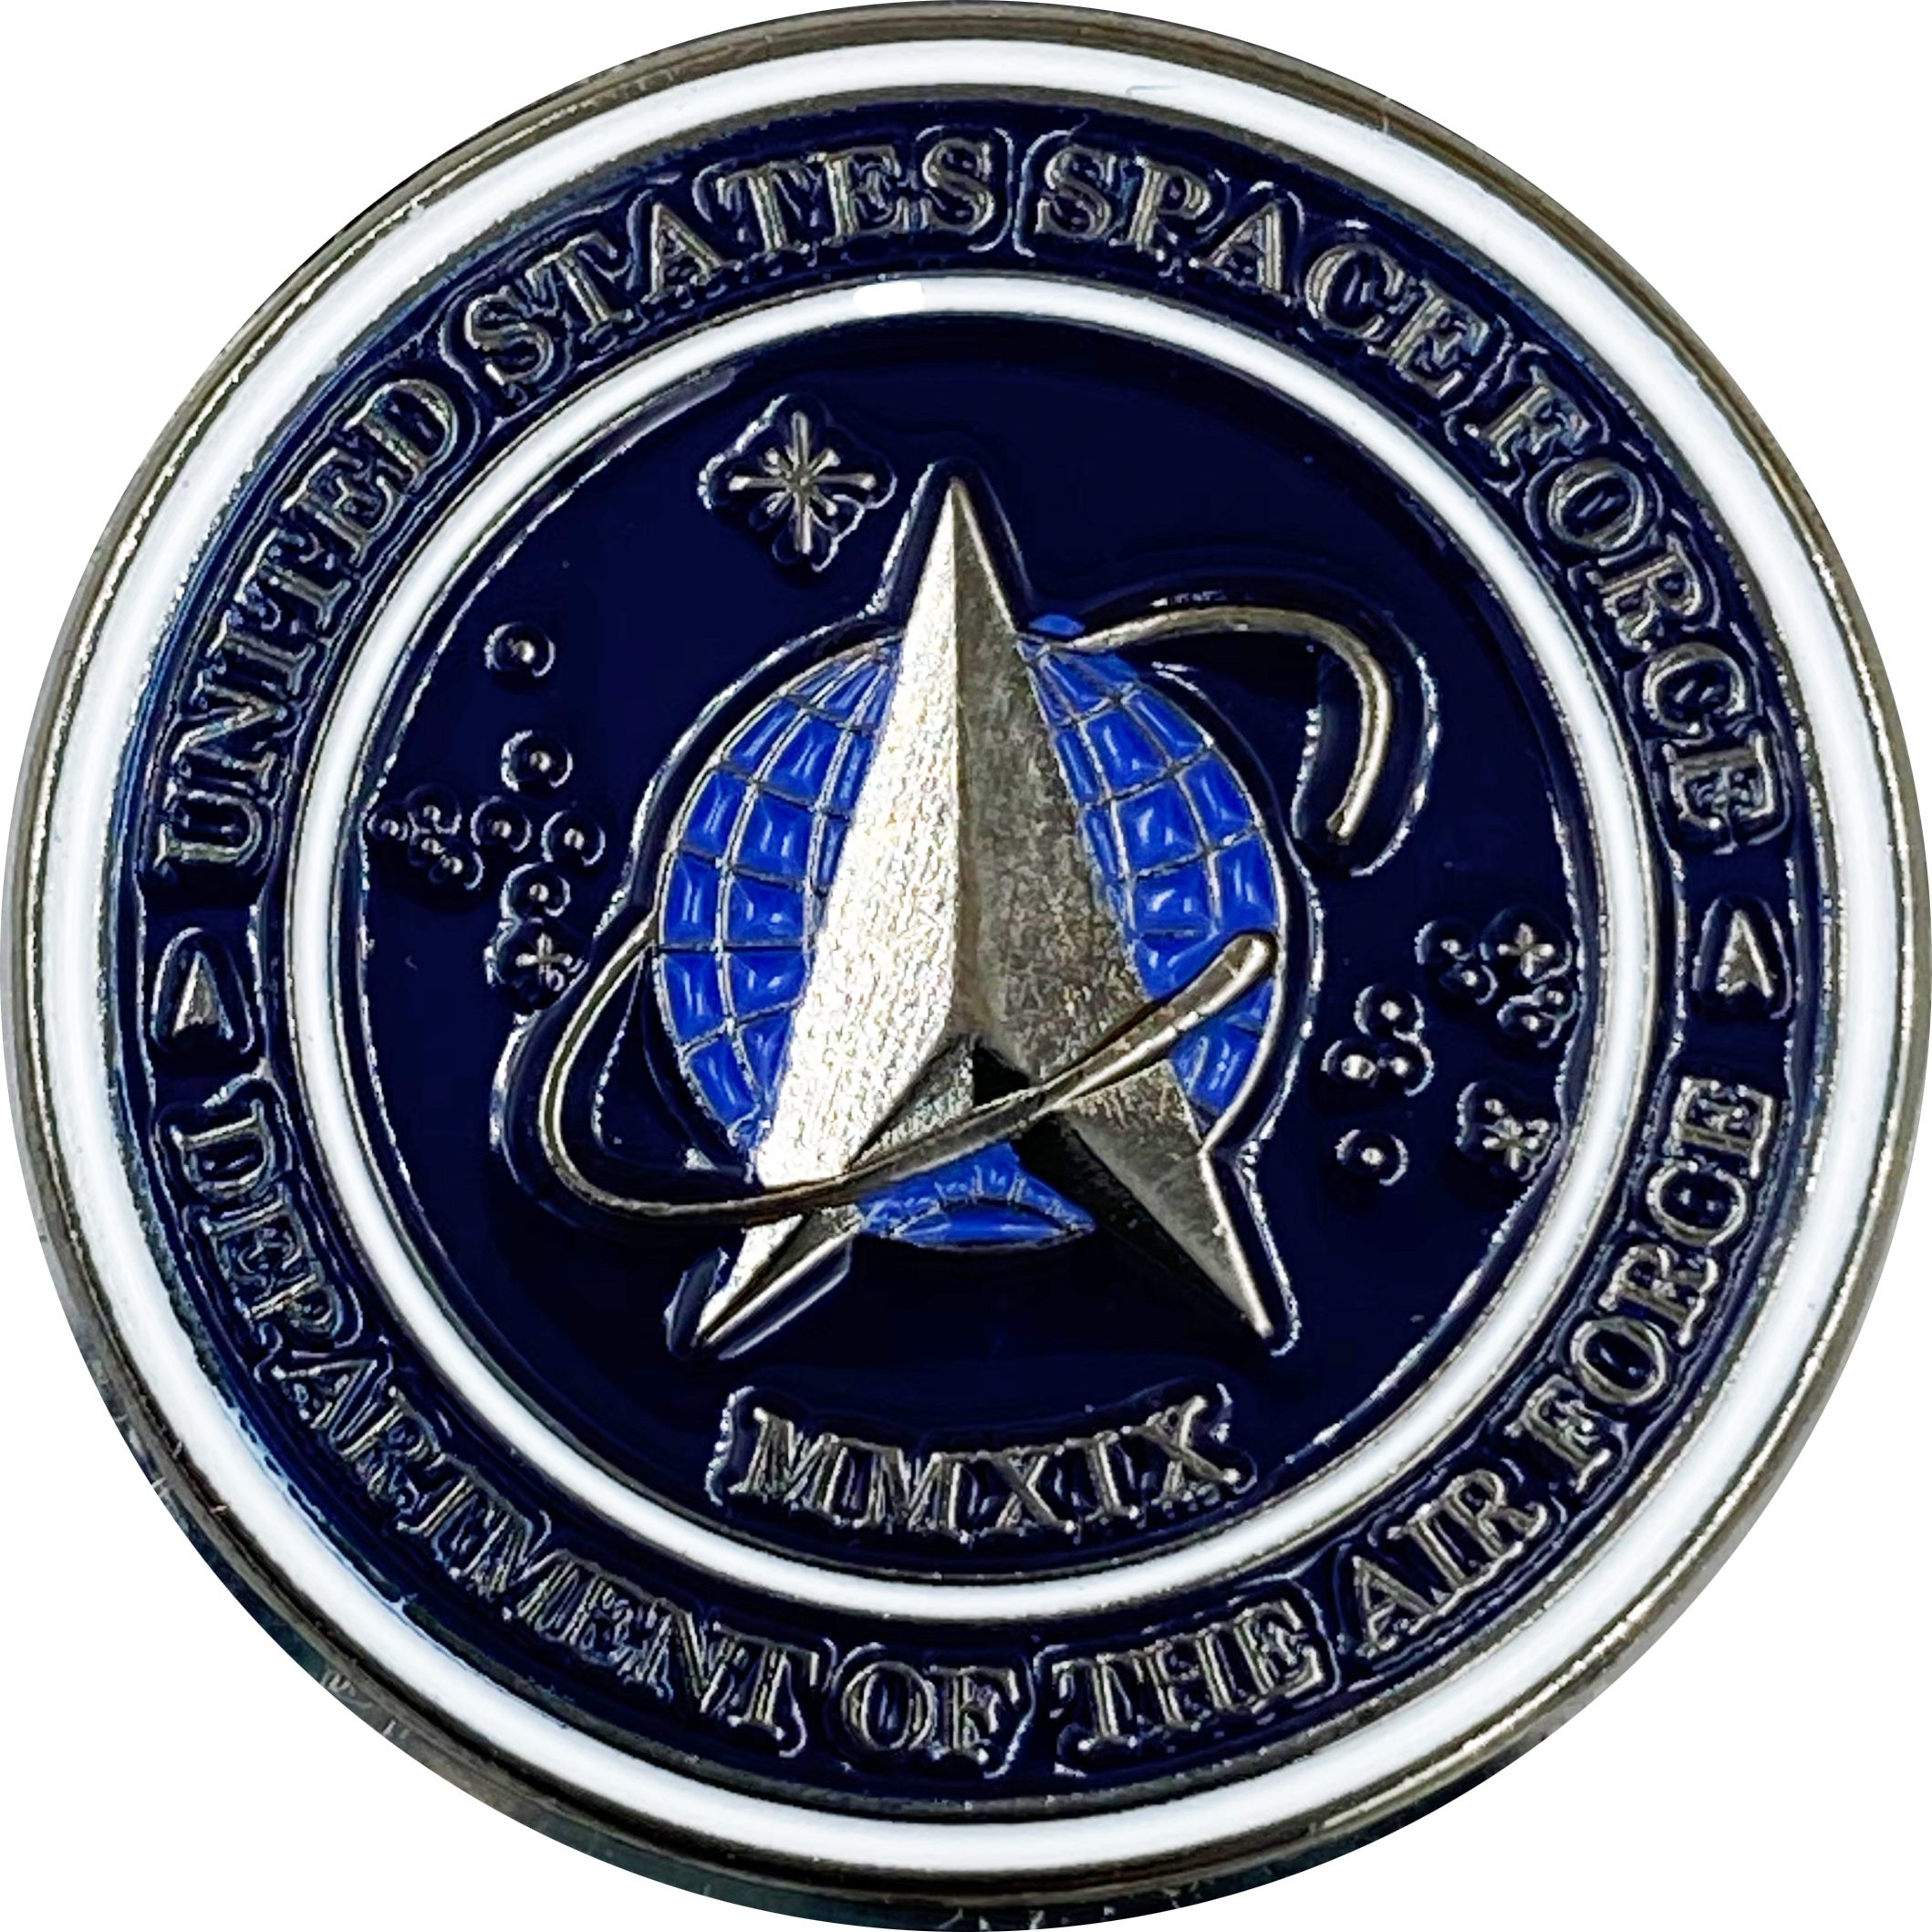 DL1-13 Space Force Pin United States Air Force UFAC USSF